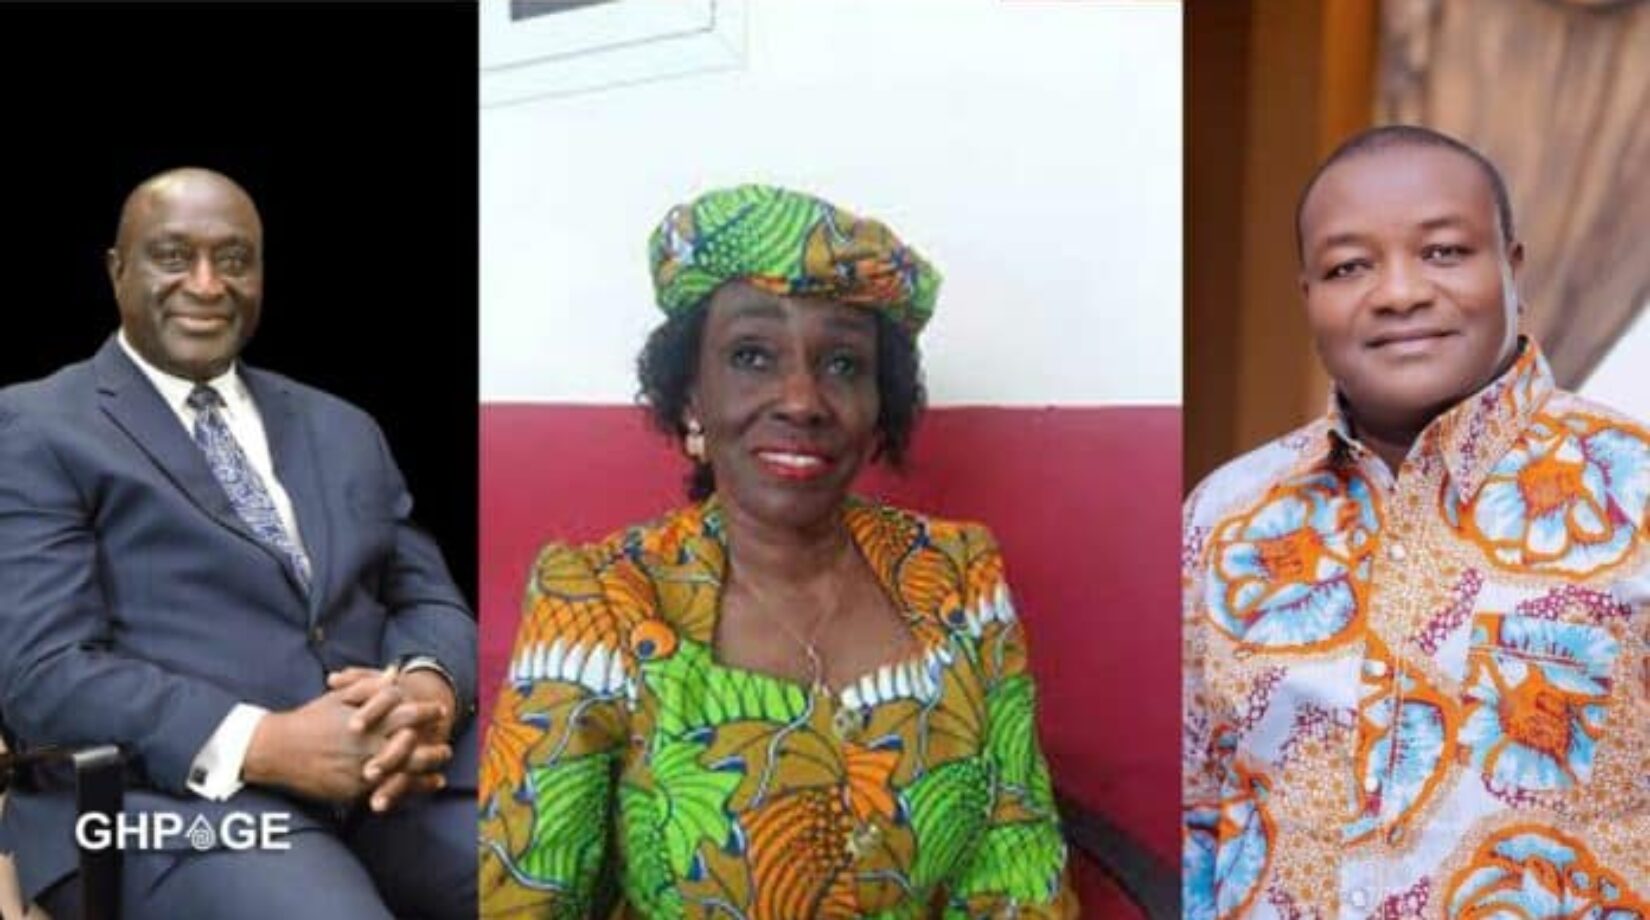 Spotlight on Presidential Aspirants who broke away to form their own party